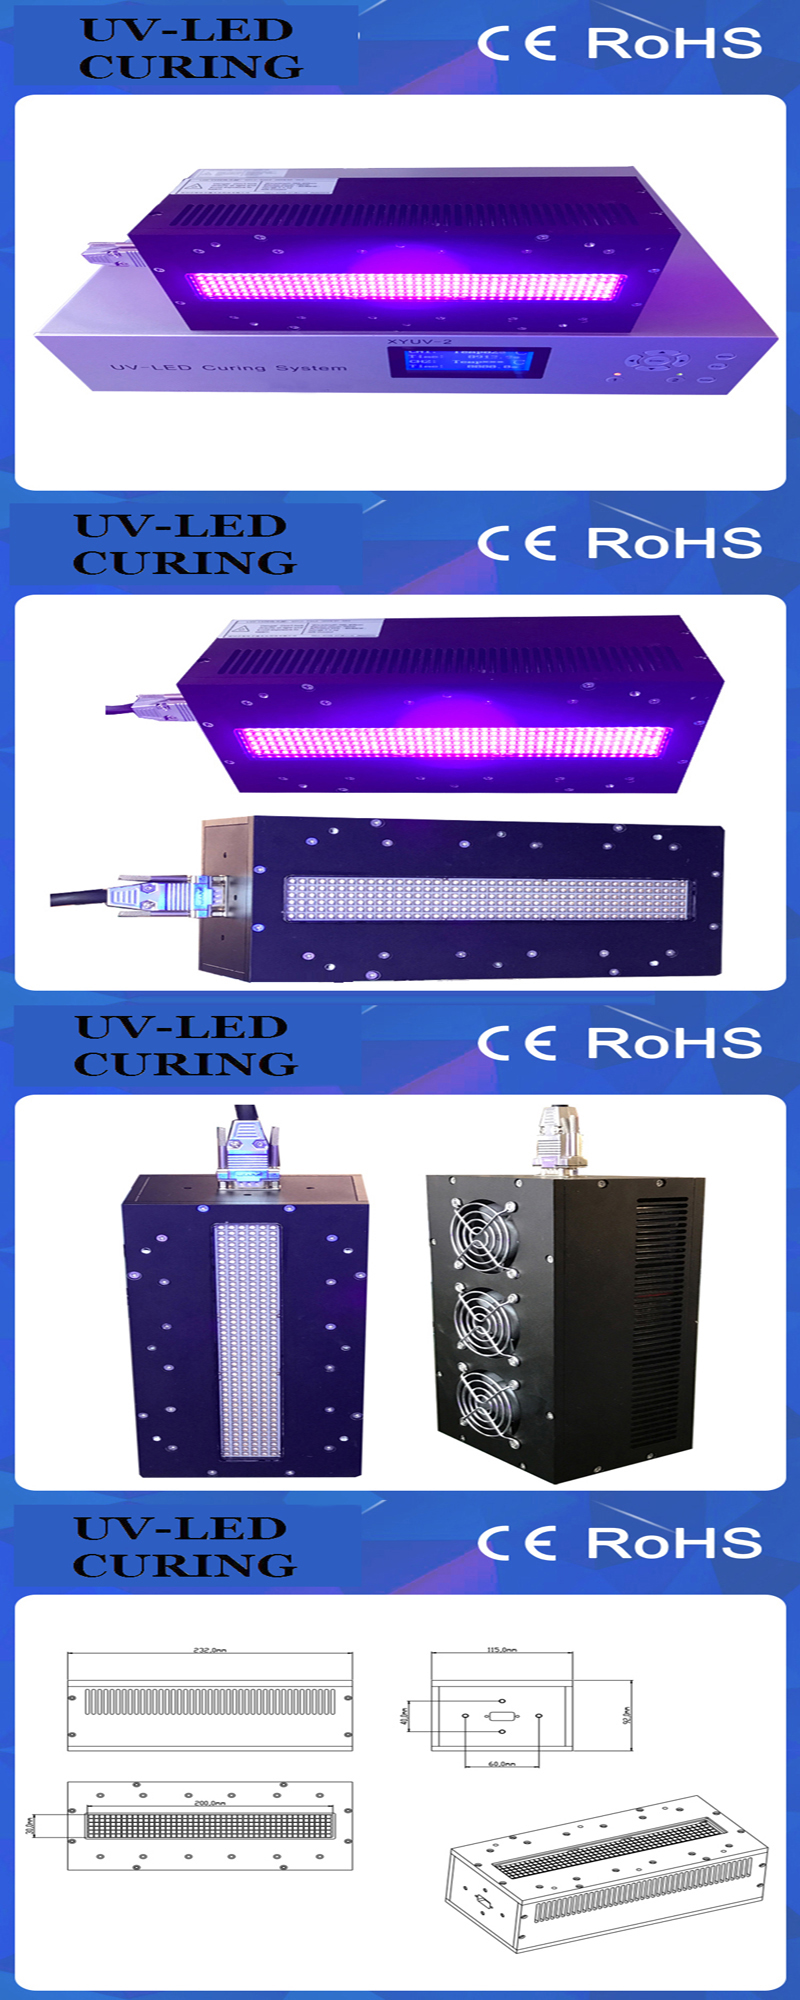 Energy Saving UV LED Curing Systems for Coating